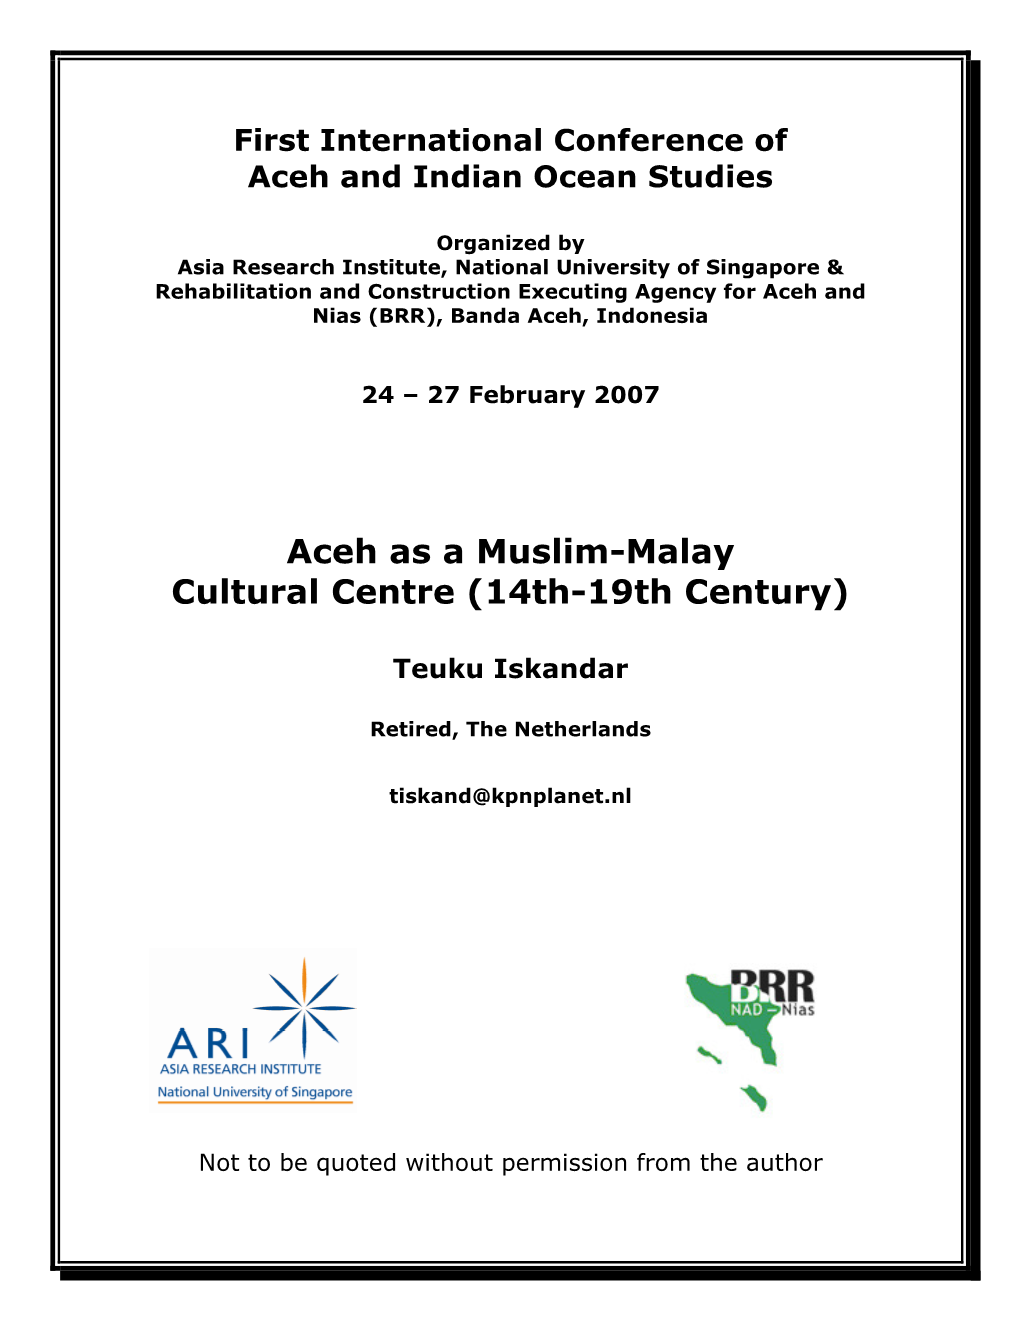 Aceh As a Muslim-Malay Cultural Centre (14Th-19Th Century)